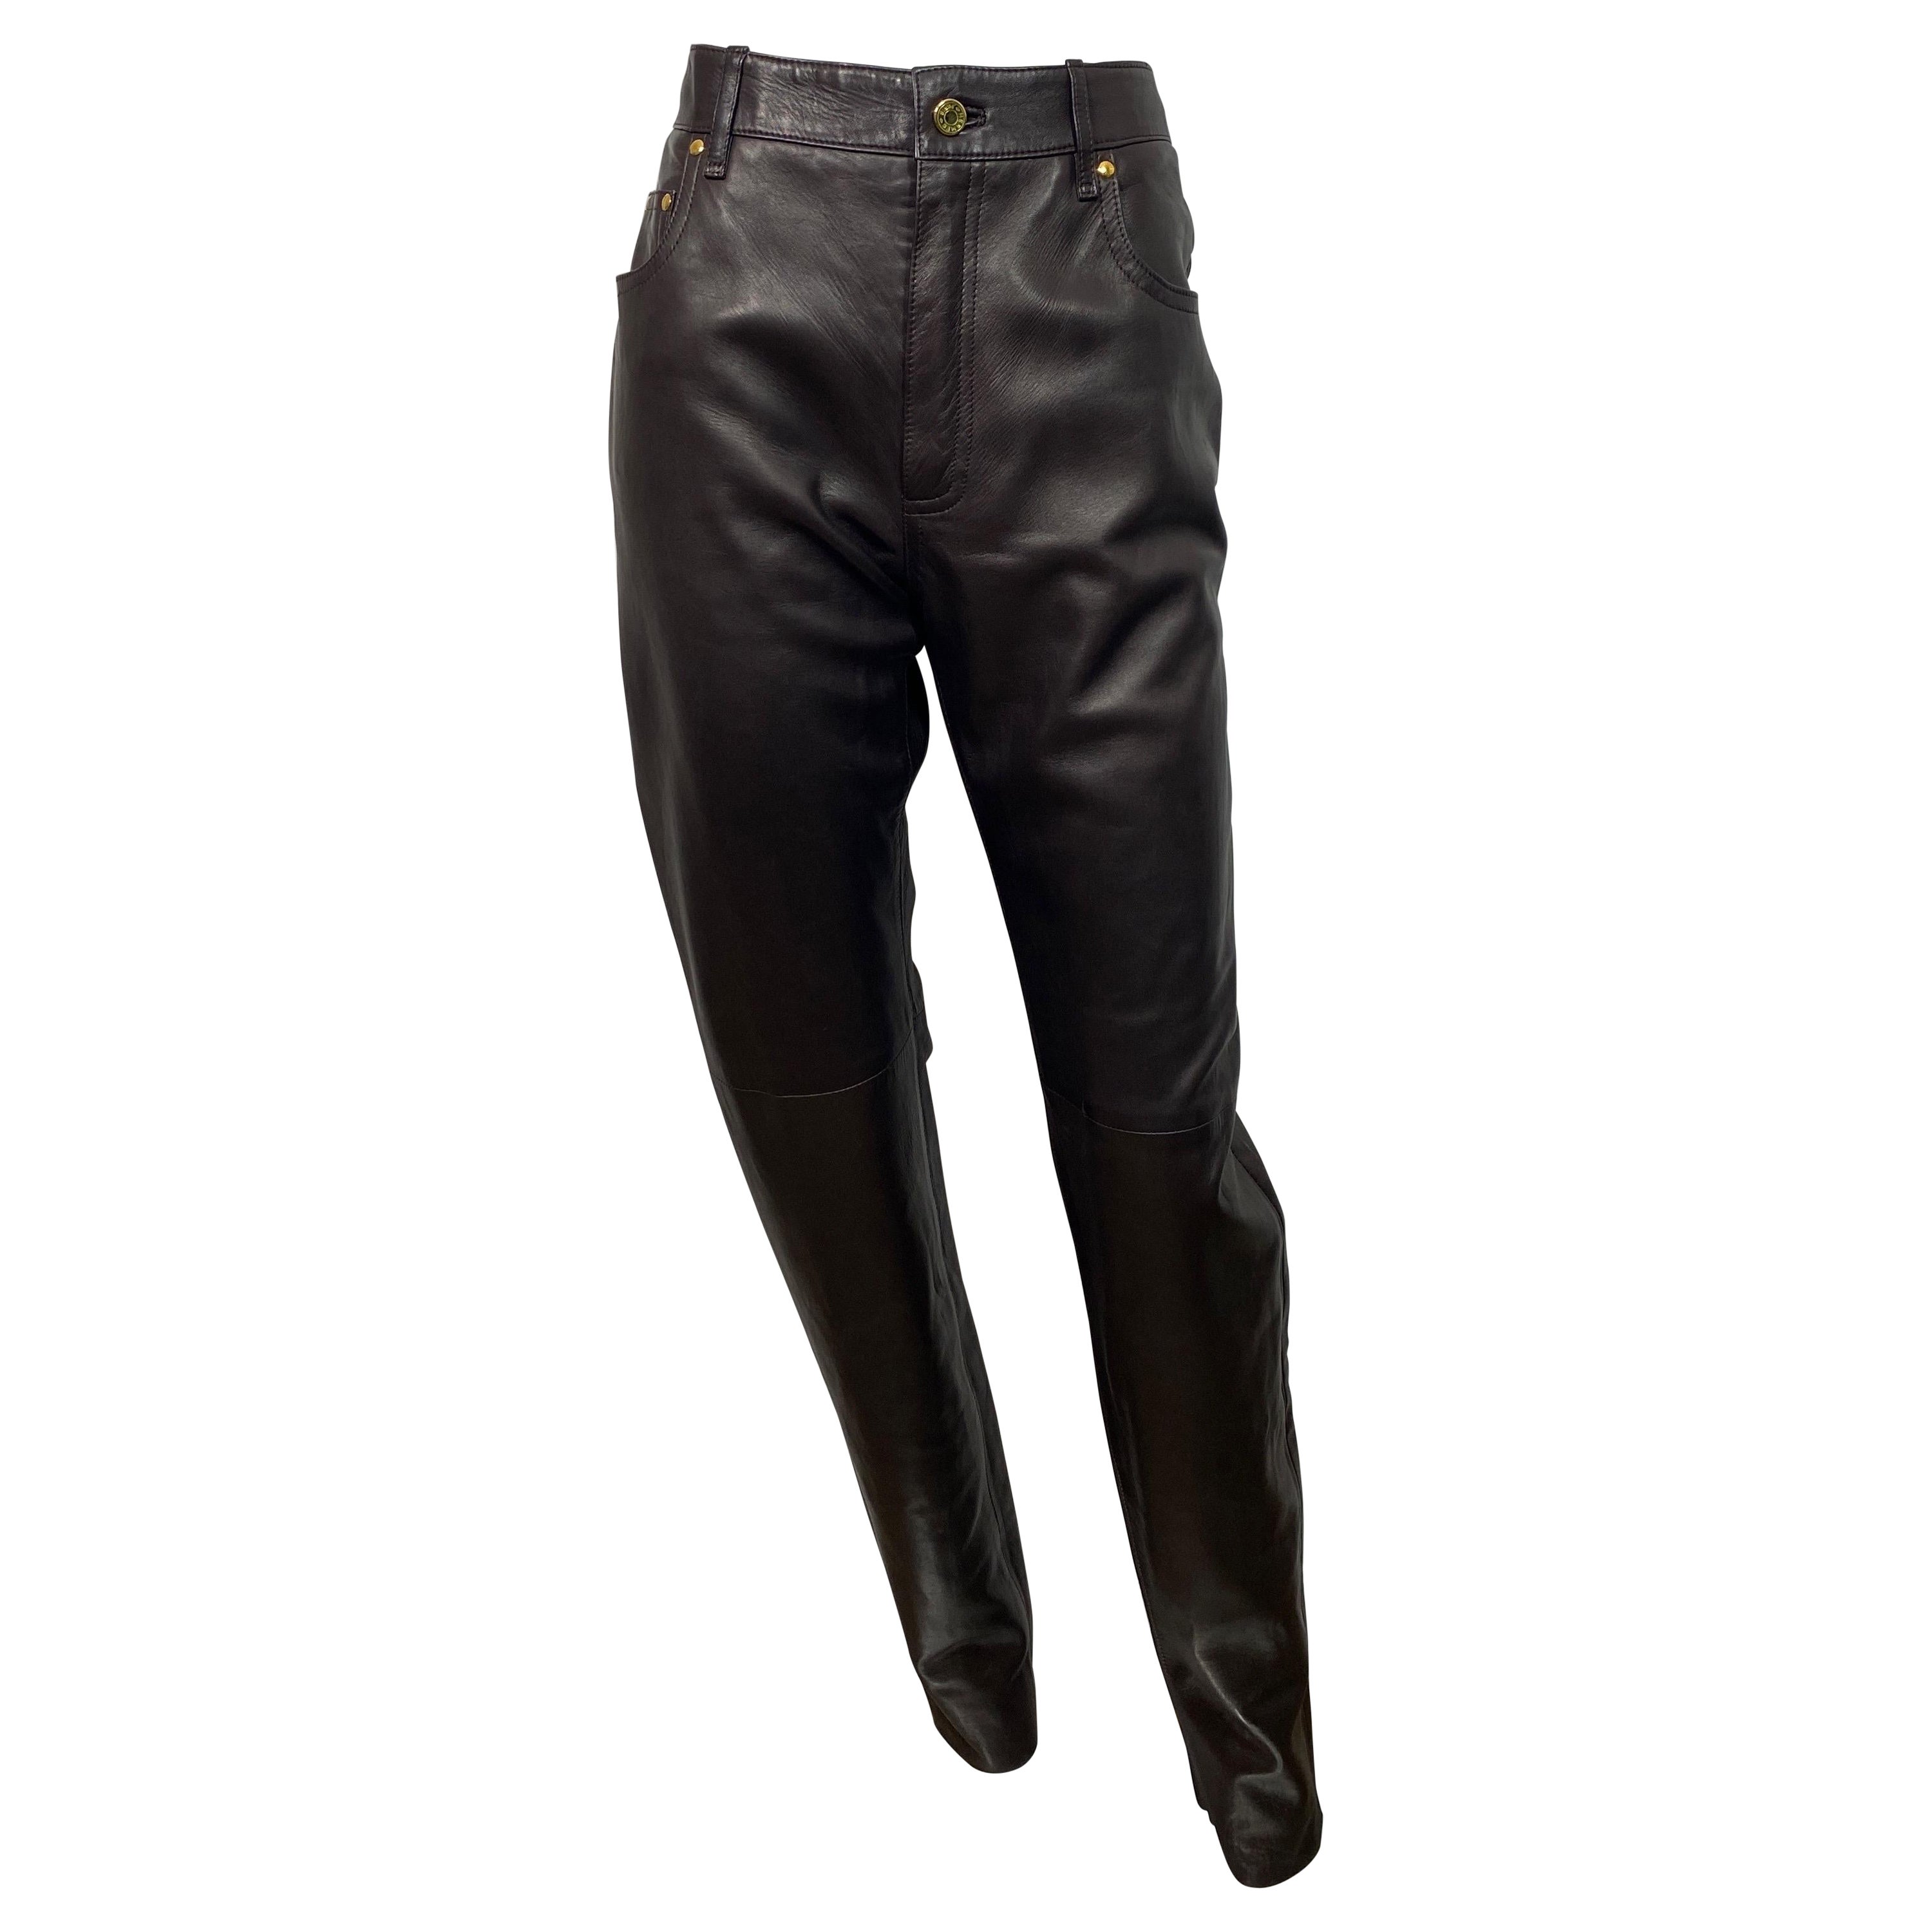 Hermes 1990’s Vintage Chocolate Brown Jean Style Leather Pants - Size 42 For Sale